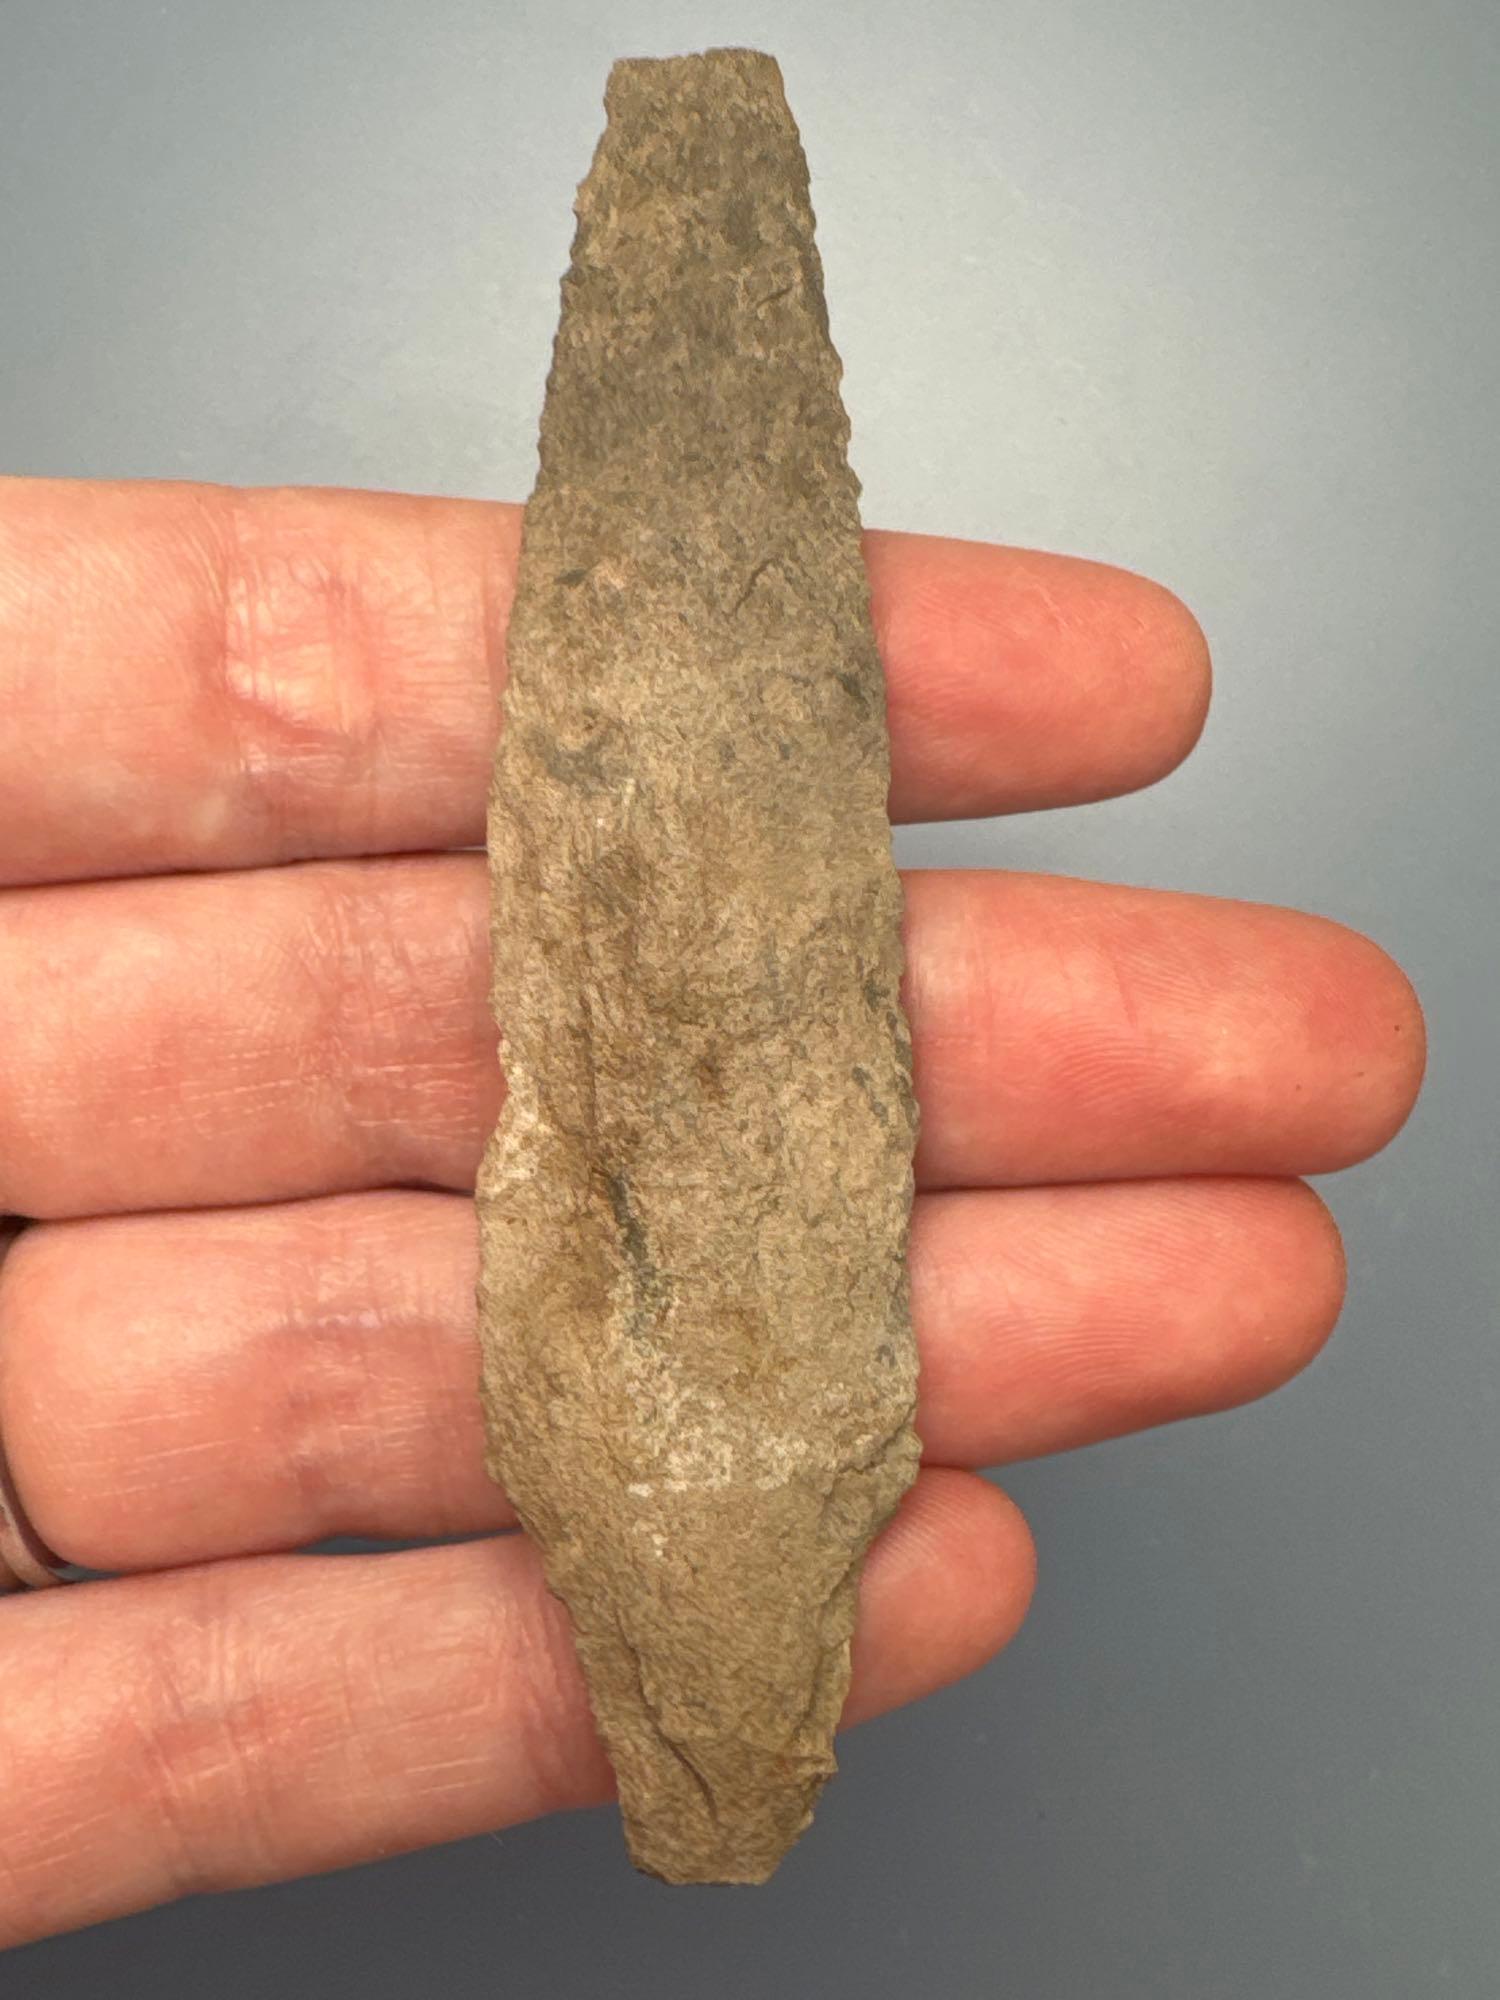 Lot of 23 Various Arrowheads, Longest is 3 5/16", Found in Jim Thorpe Area in Pennsylvania